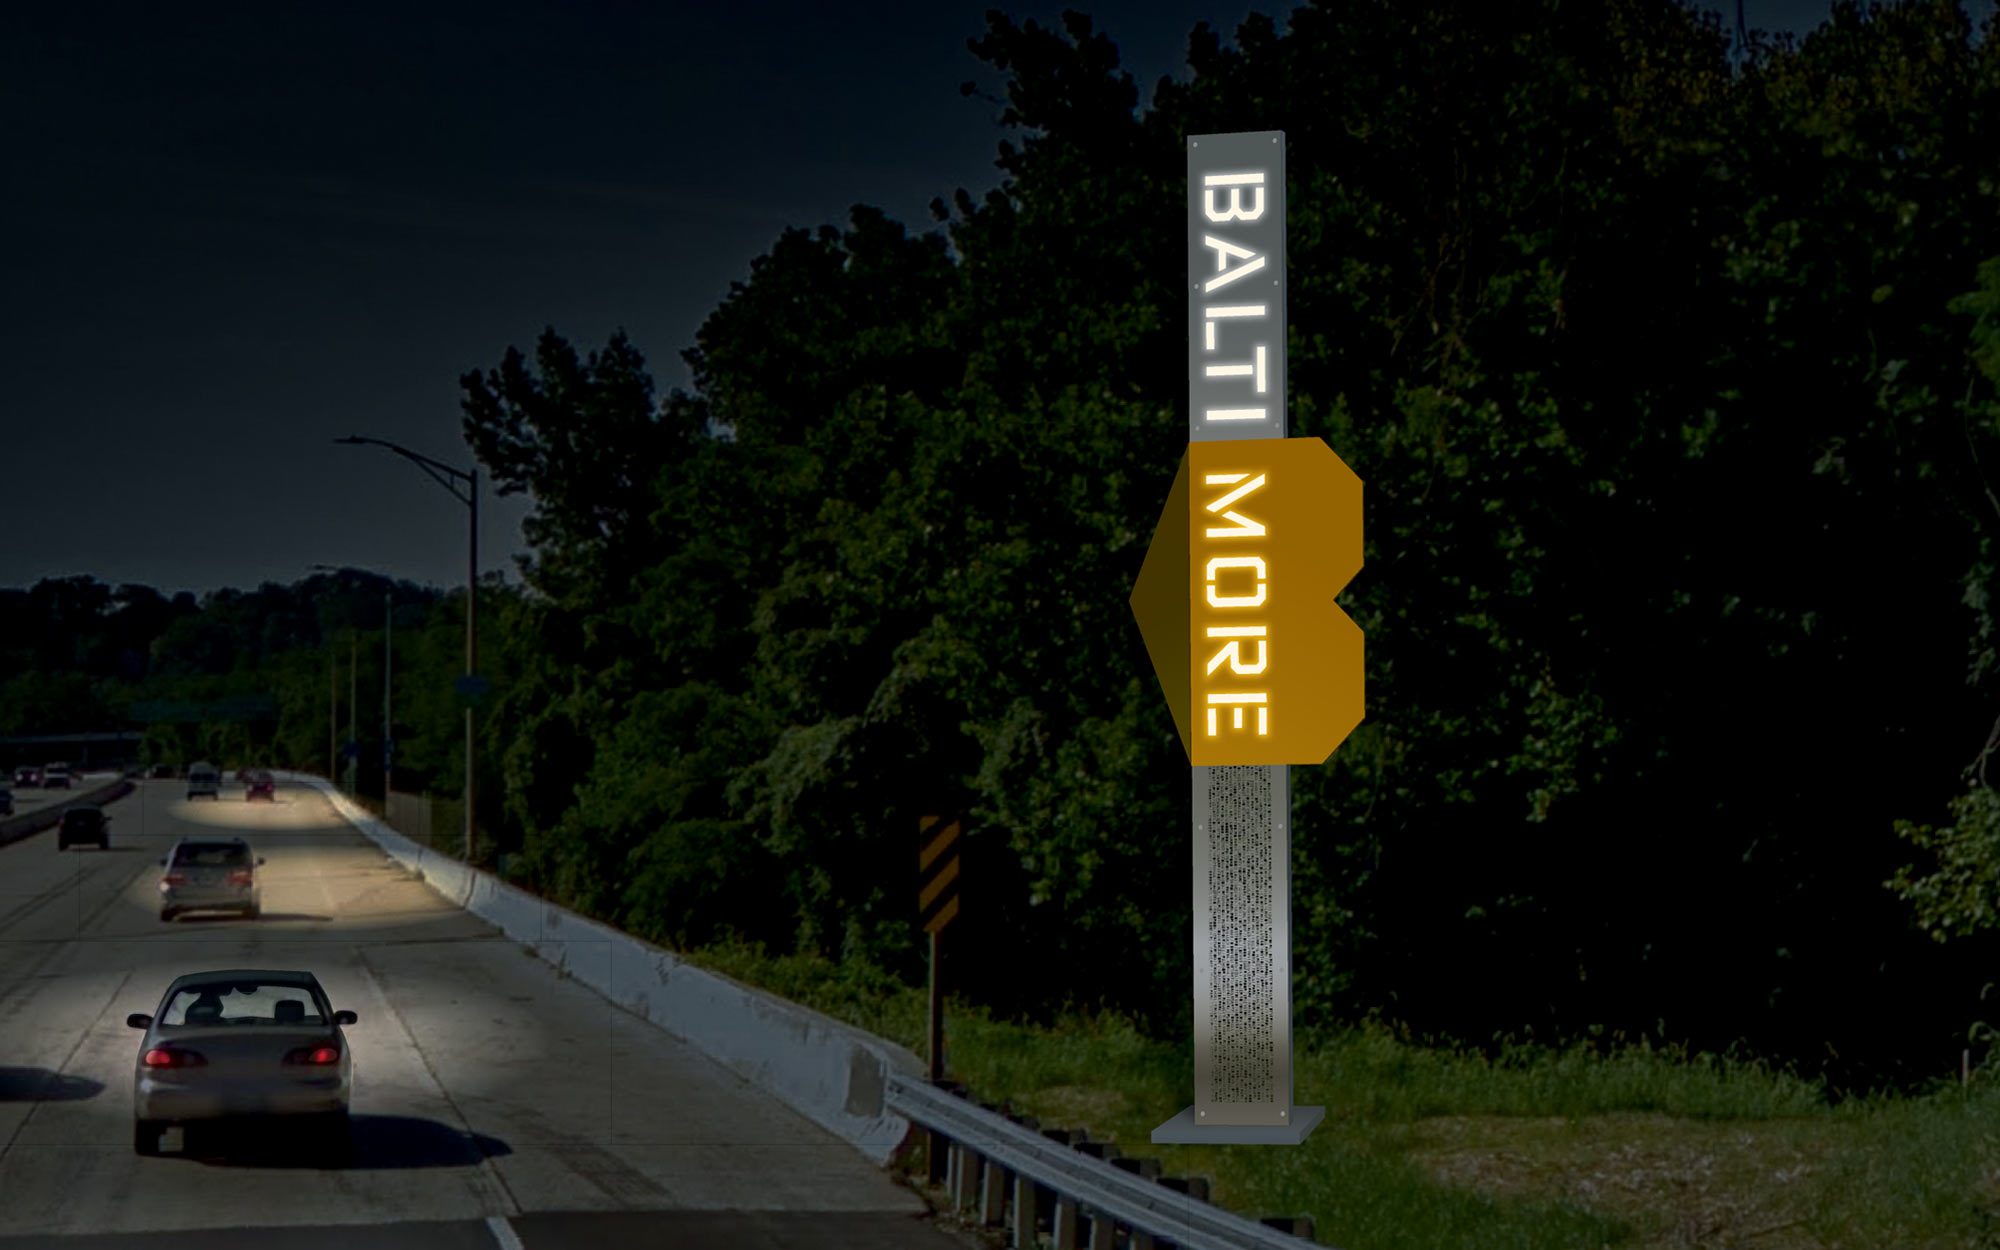 Nighttime photo rendering of a new welcome sign proposed for the city of Baltimore on the side of I-83